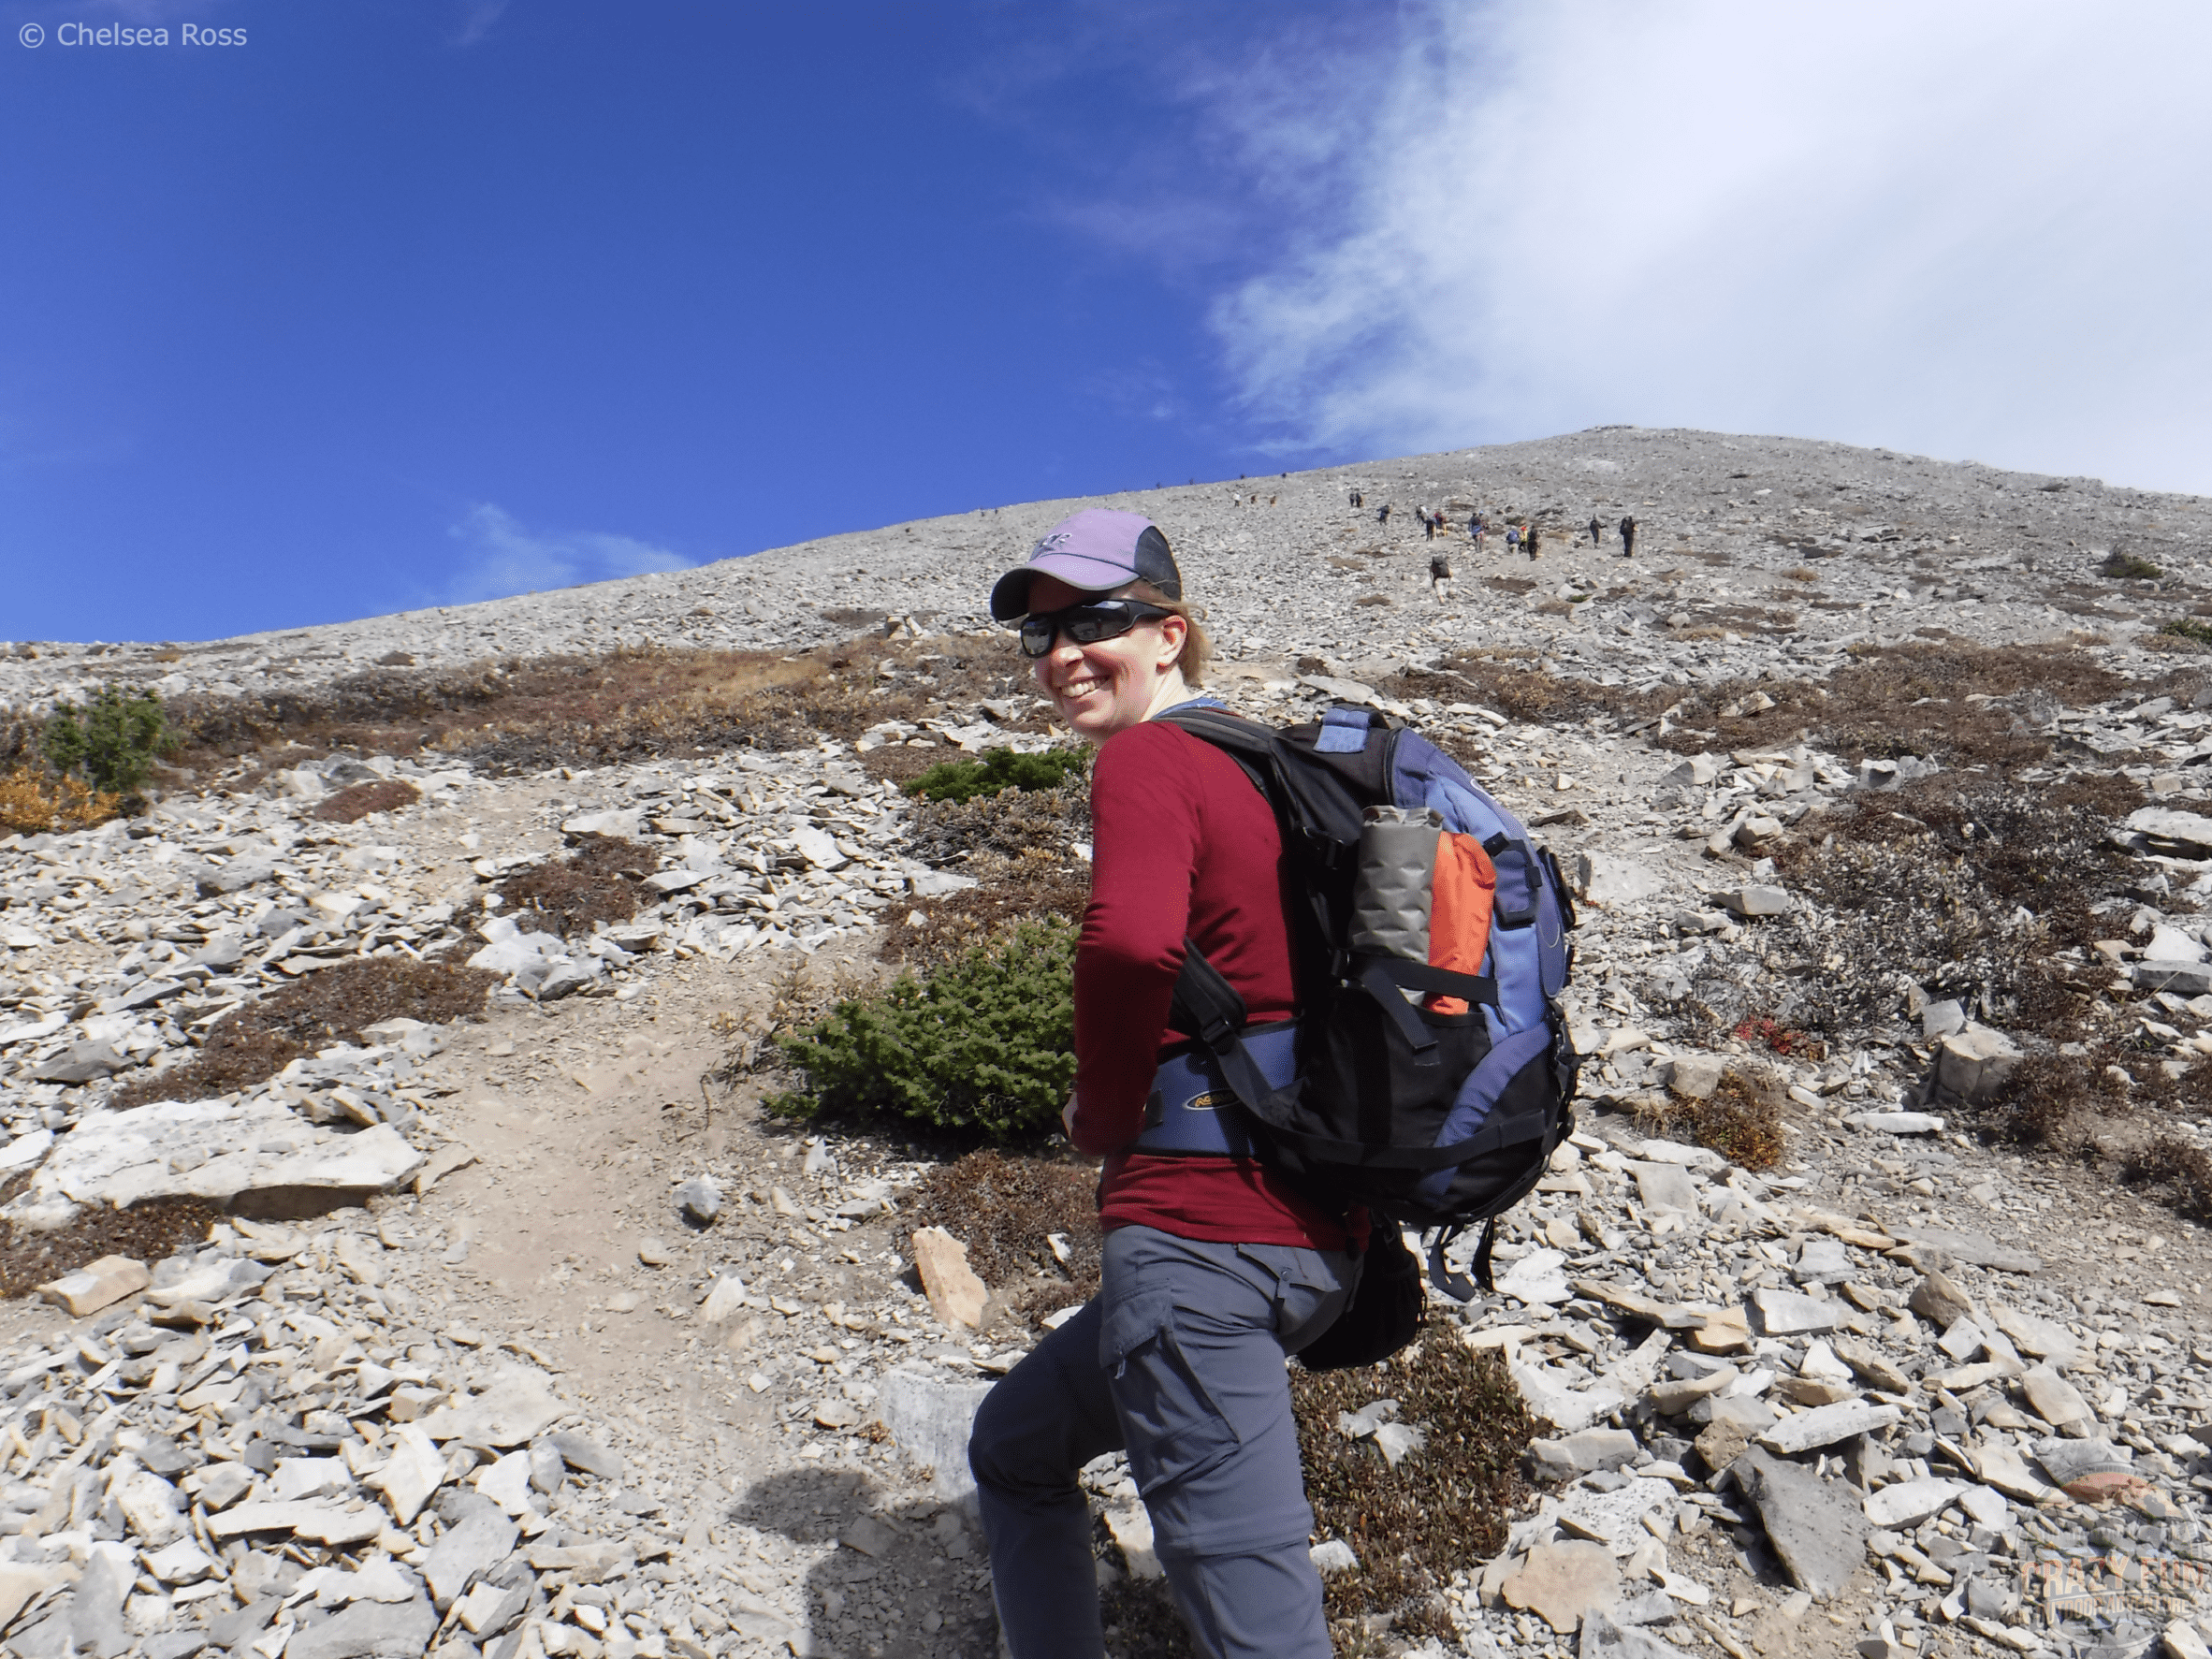 I'm hiking in my maroon merino long sleeve shirt. My orange MEC seat cushion can be seen on the left side of my backpack pocket.